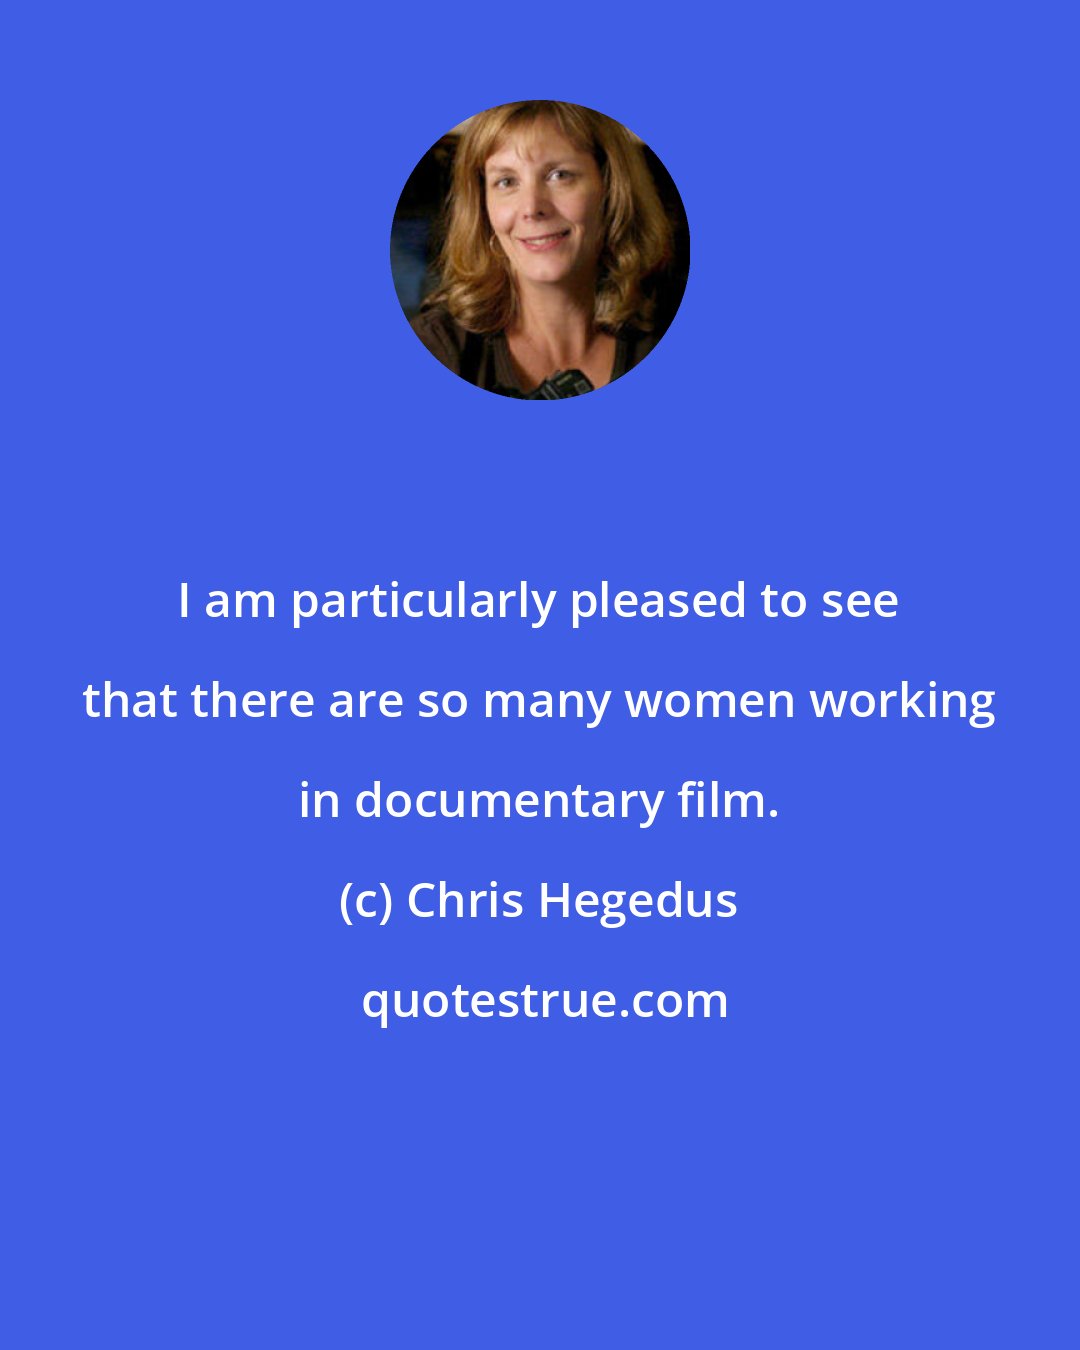 Chris Hegedus: I am particularly pleased to see that there are so many women working in documentary film.